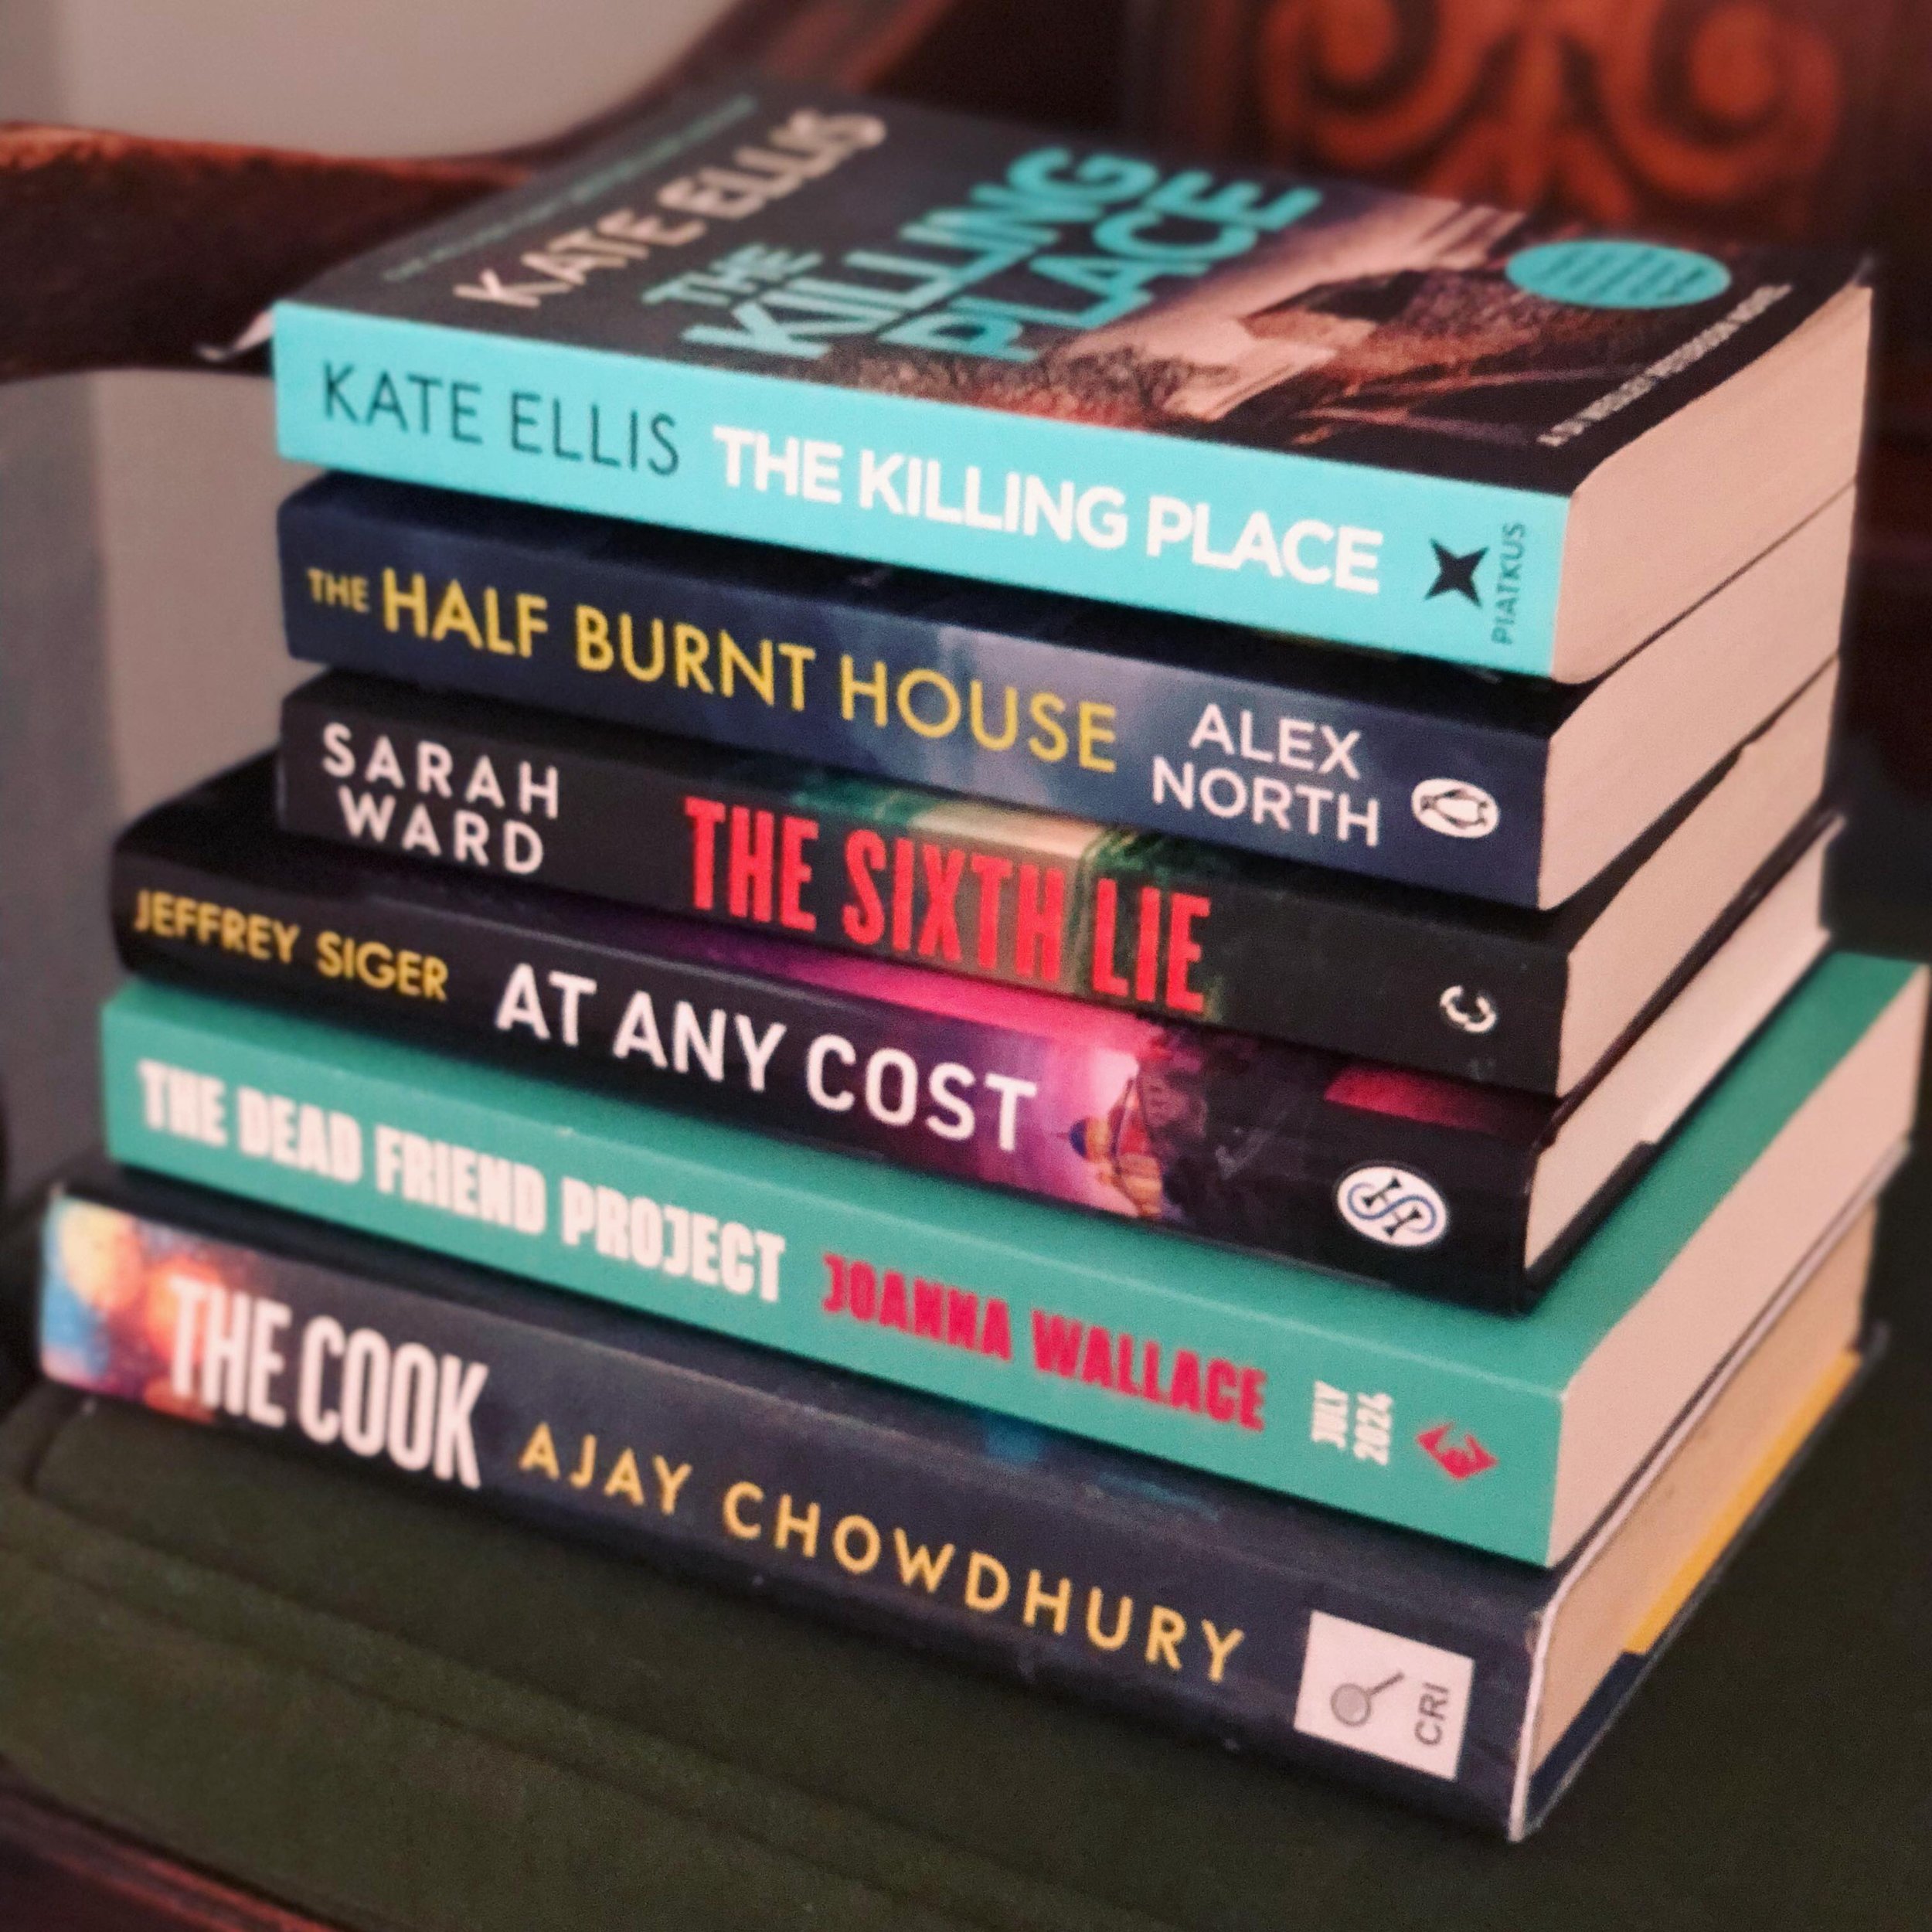 Next week, I will be at #CrimeFest, speaking to these wonderful authors about their books.
First up, on Thursday, I will be moderating a conversation between Ajay Chowdhury, Kate Ellis, Alex North and Jeffrey Siger about abuses of privilege and power